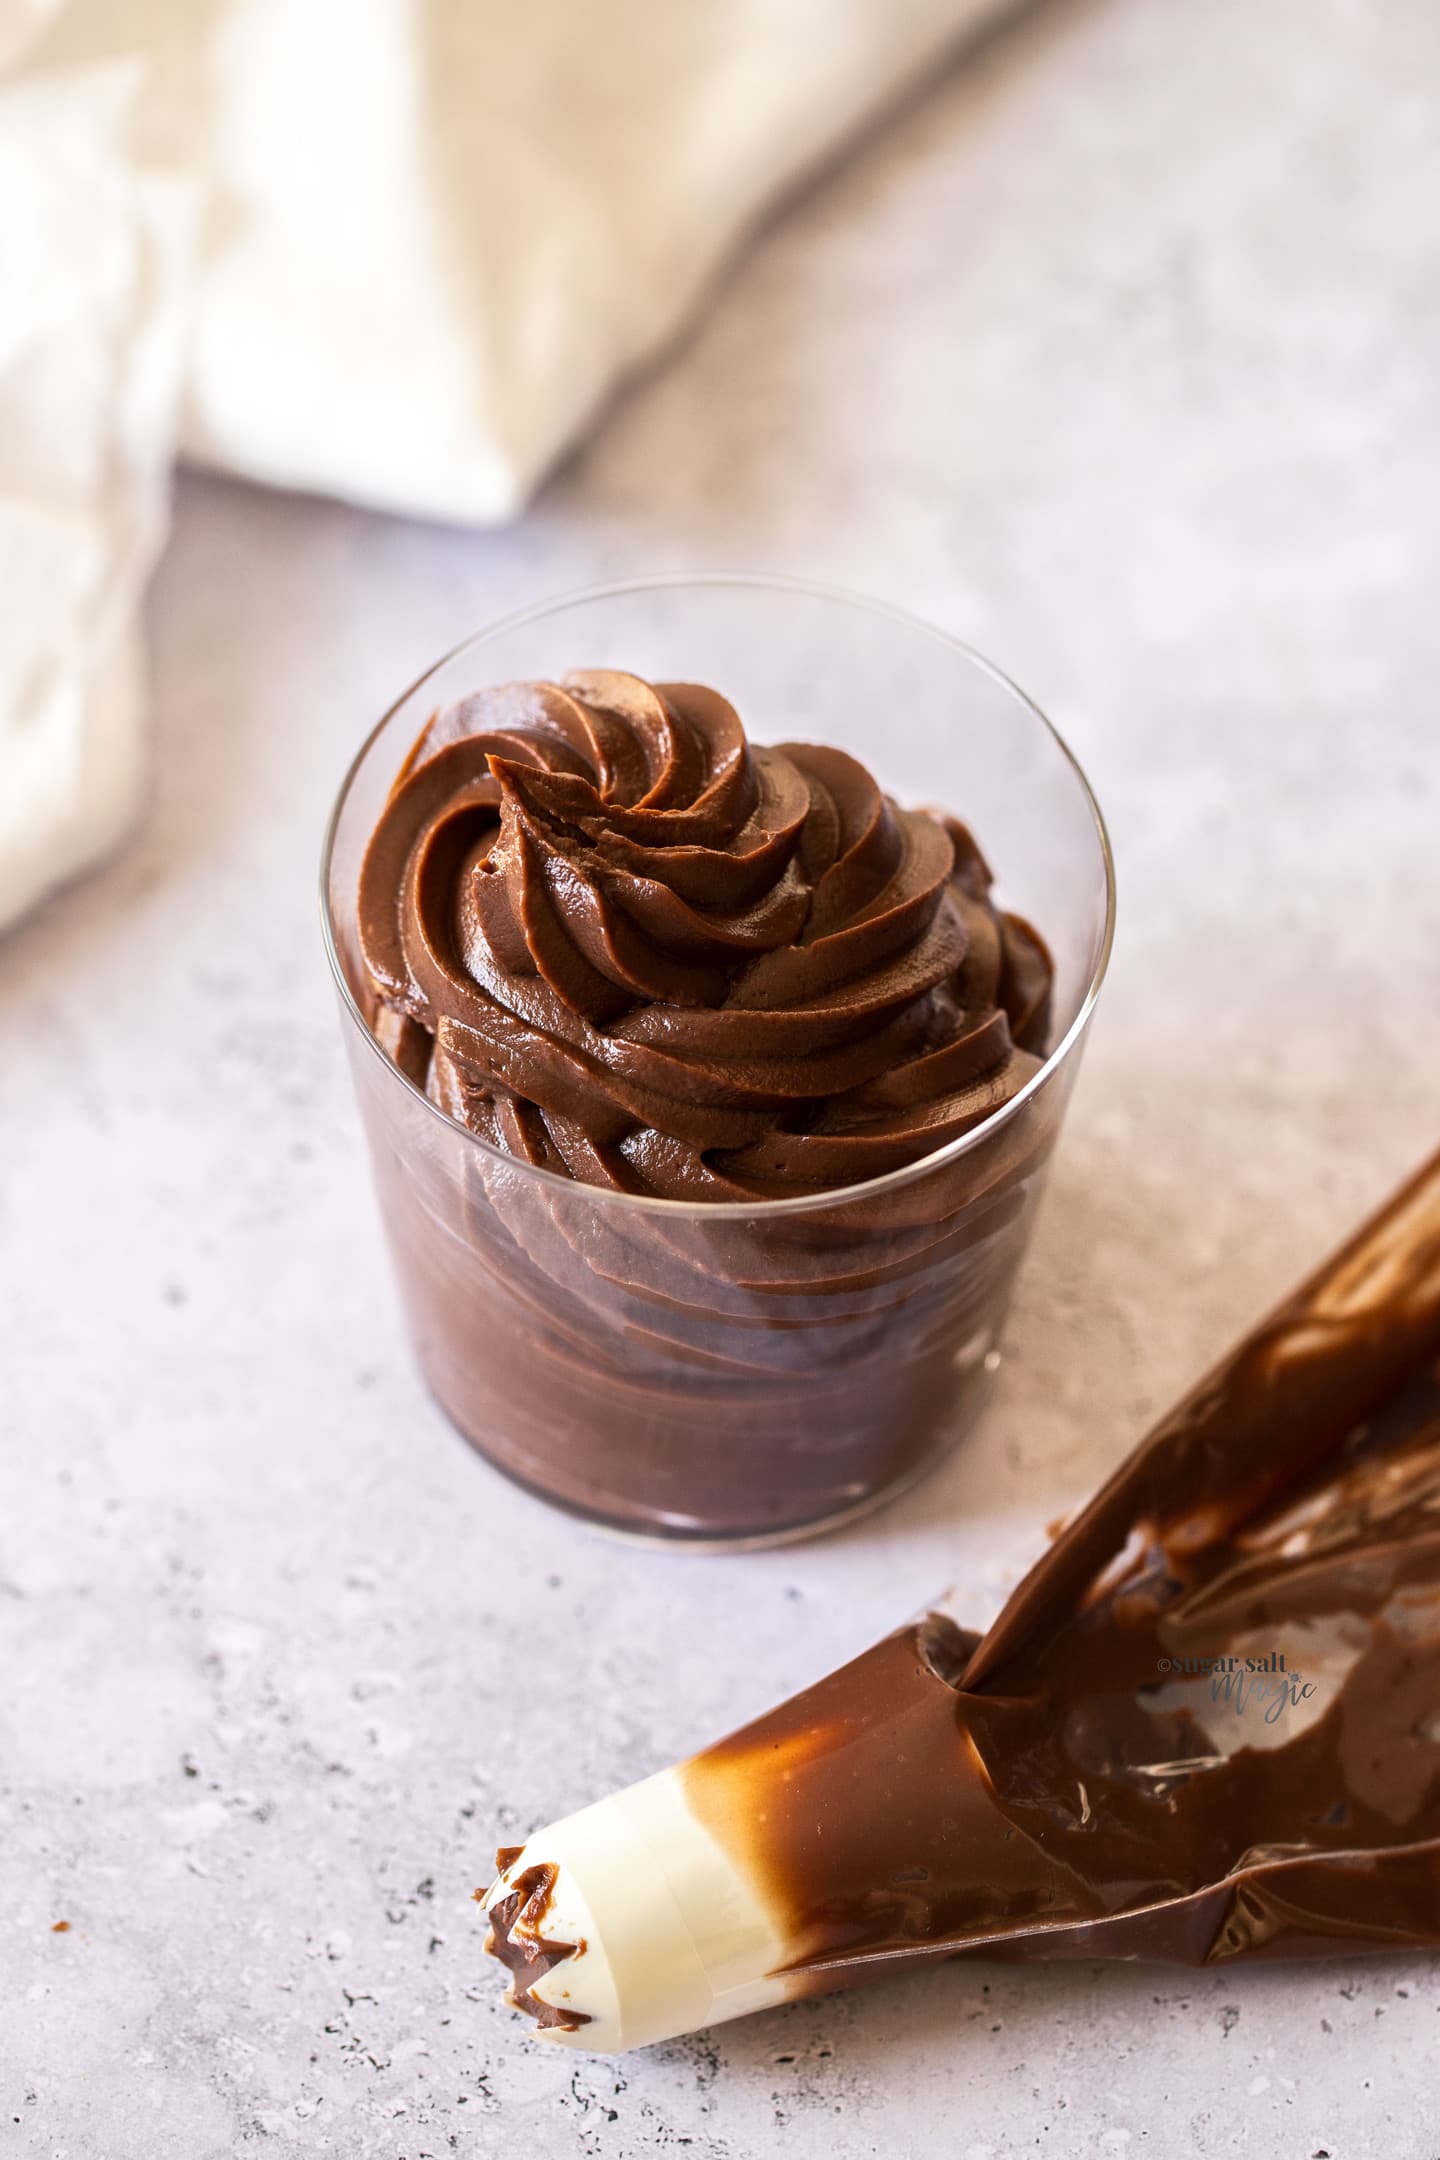 Chocolate pastry cream piped into a glass.